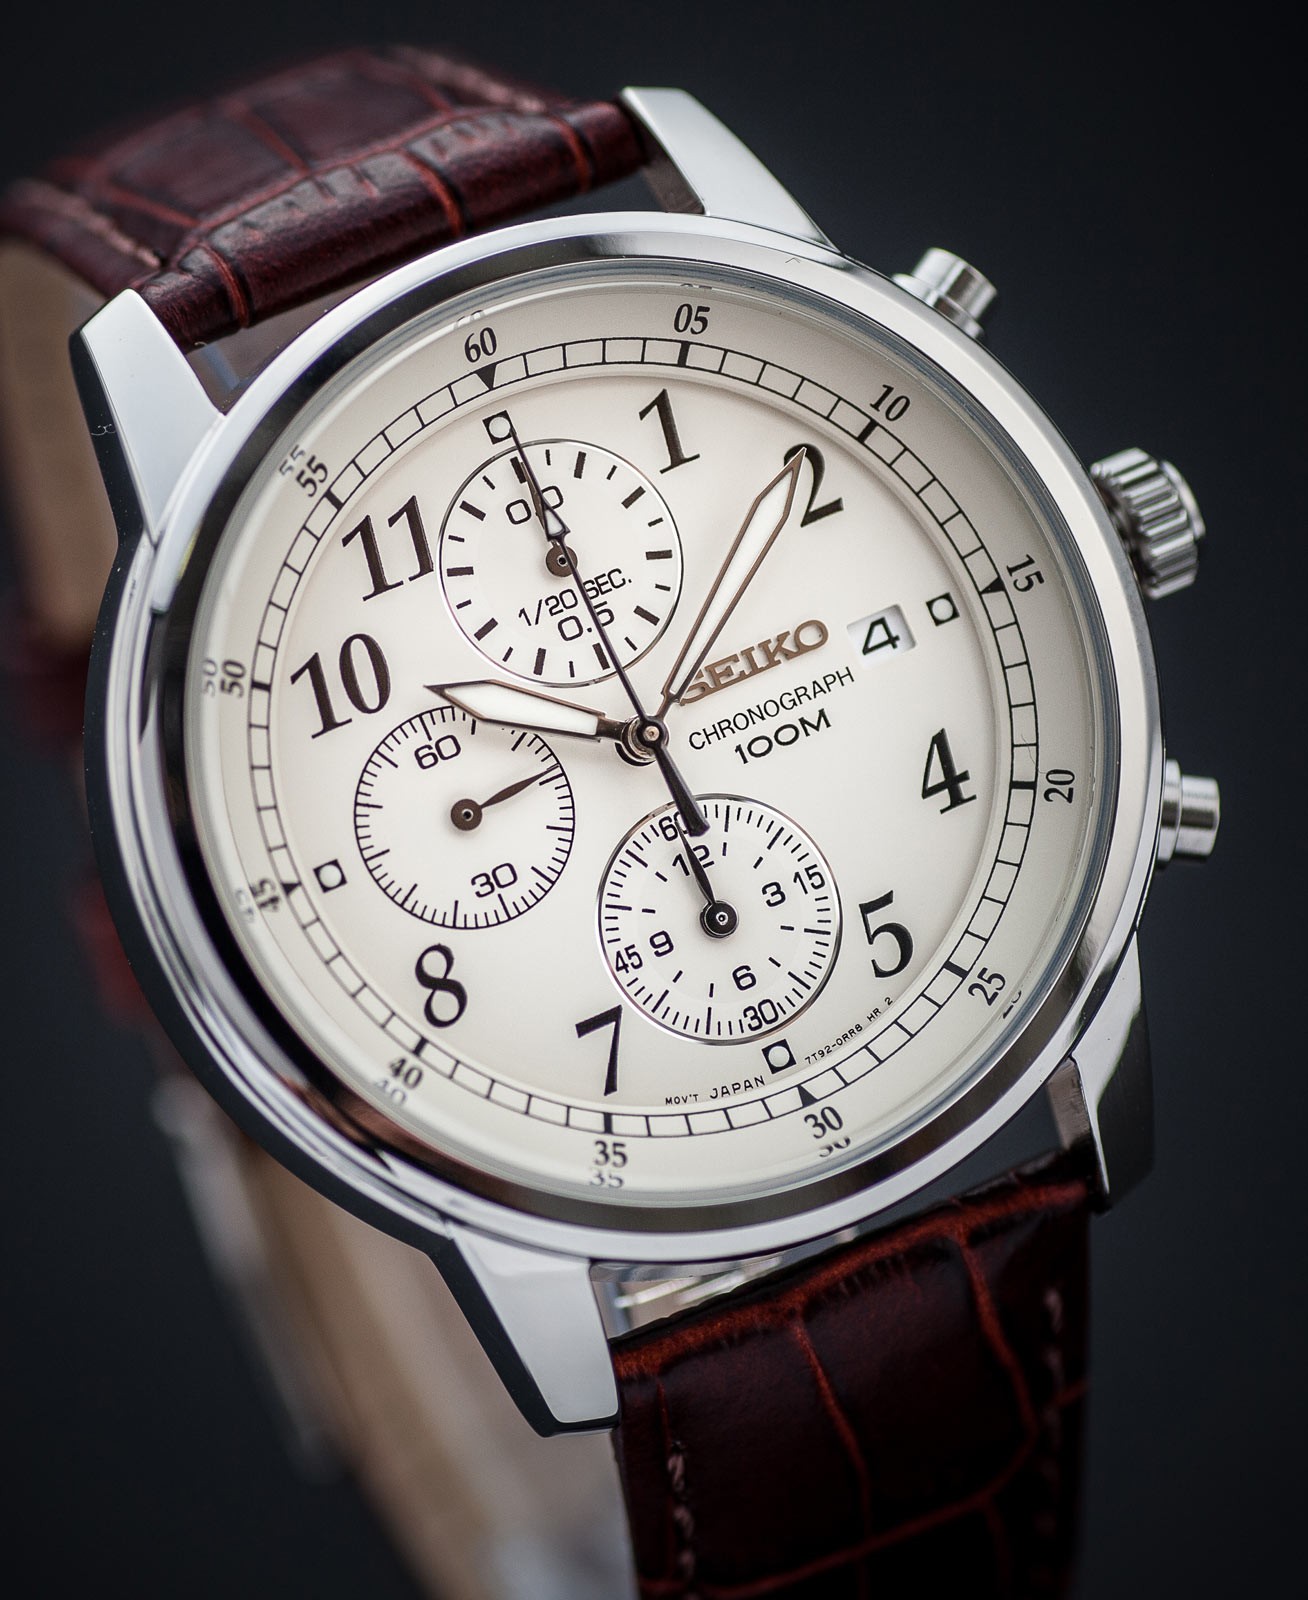 Seiko SNDC31 Review & Complete Guide - Millenary Watches